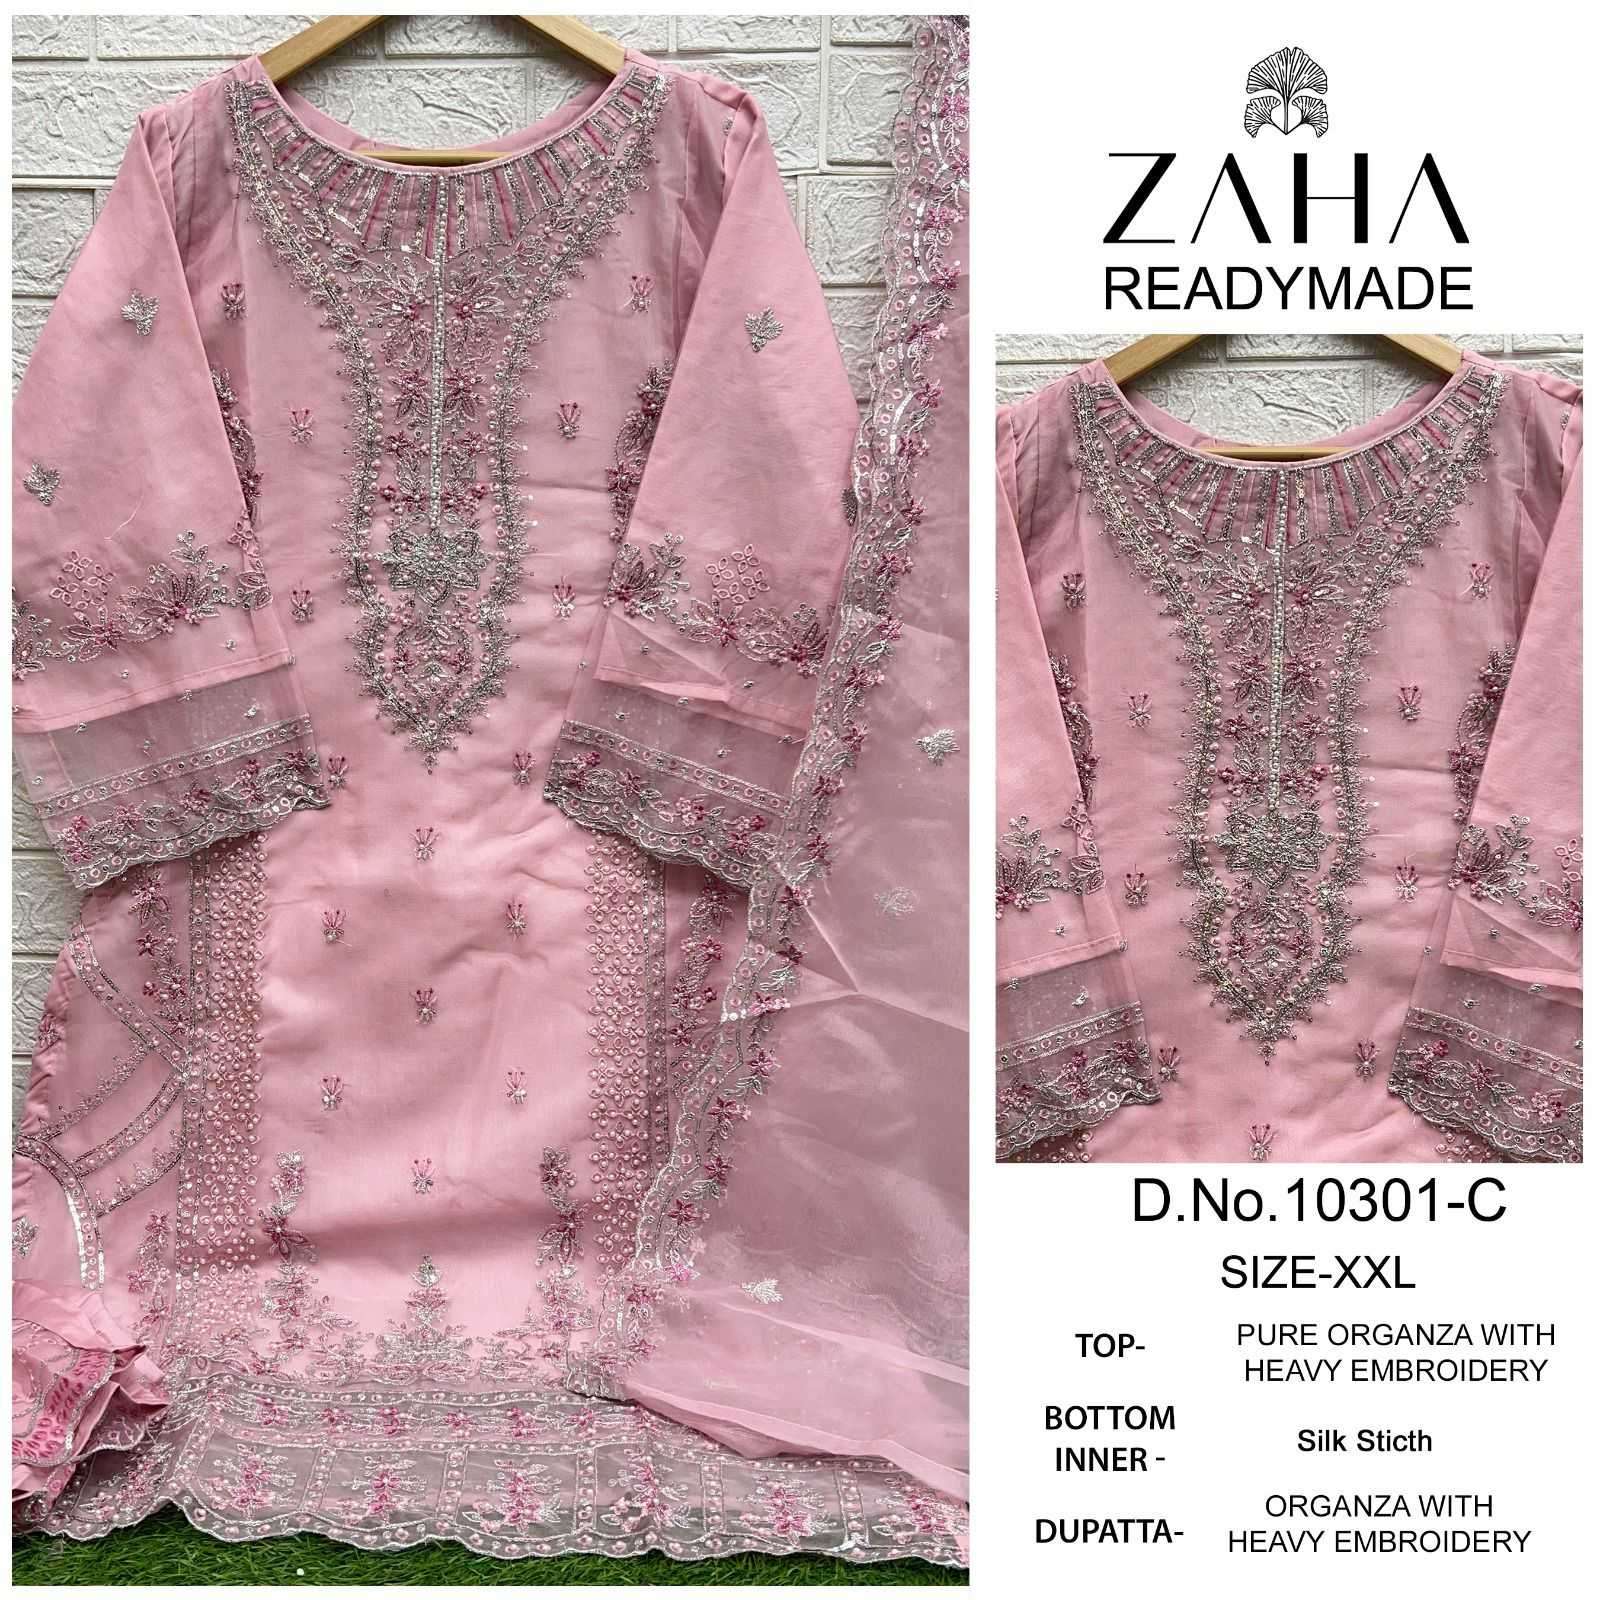 zaha 10301 organza with heavy embroidered readymade suit 